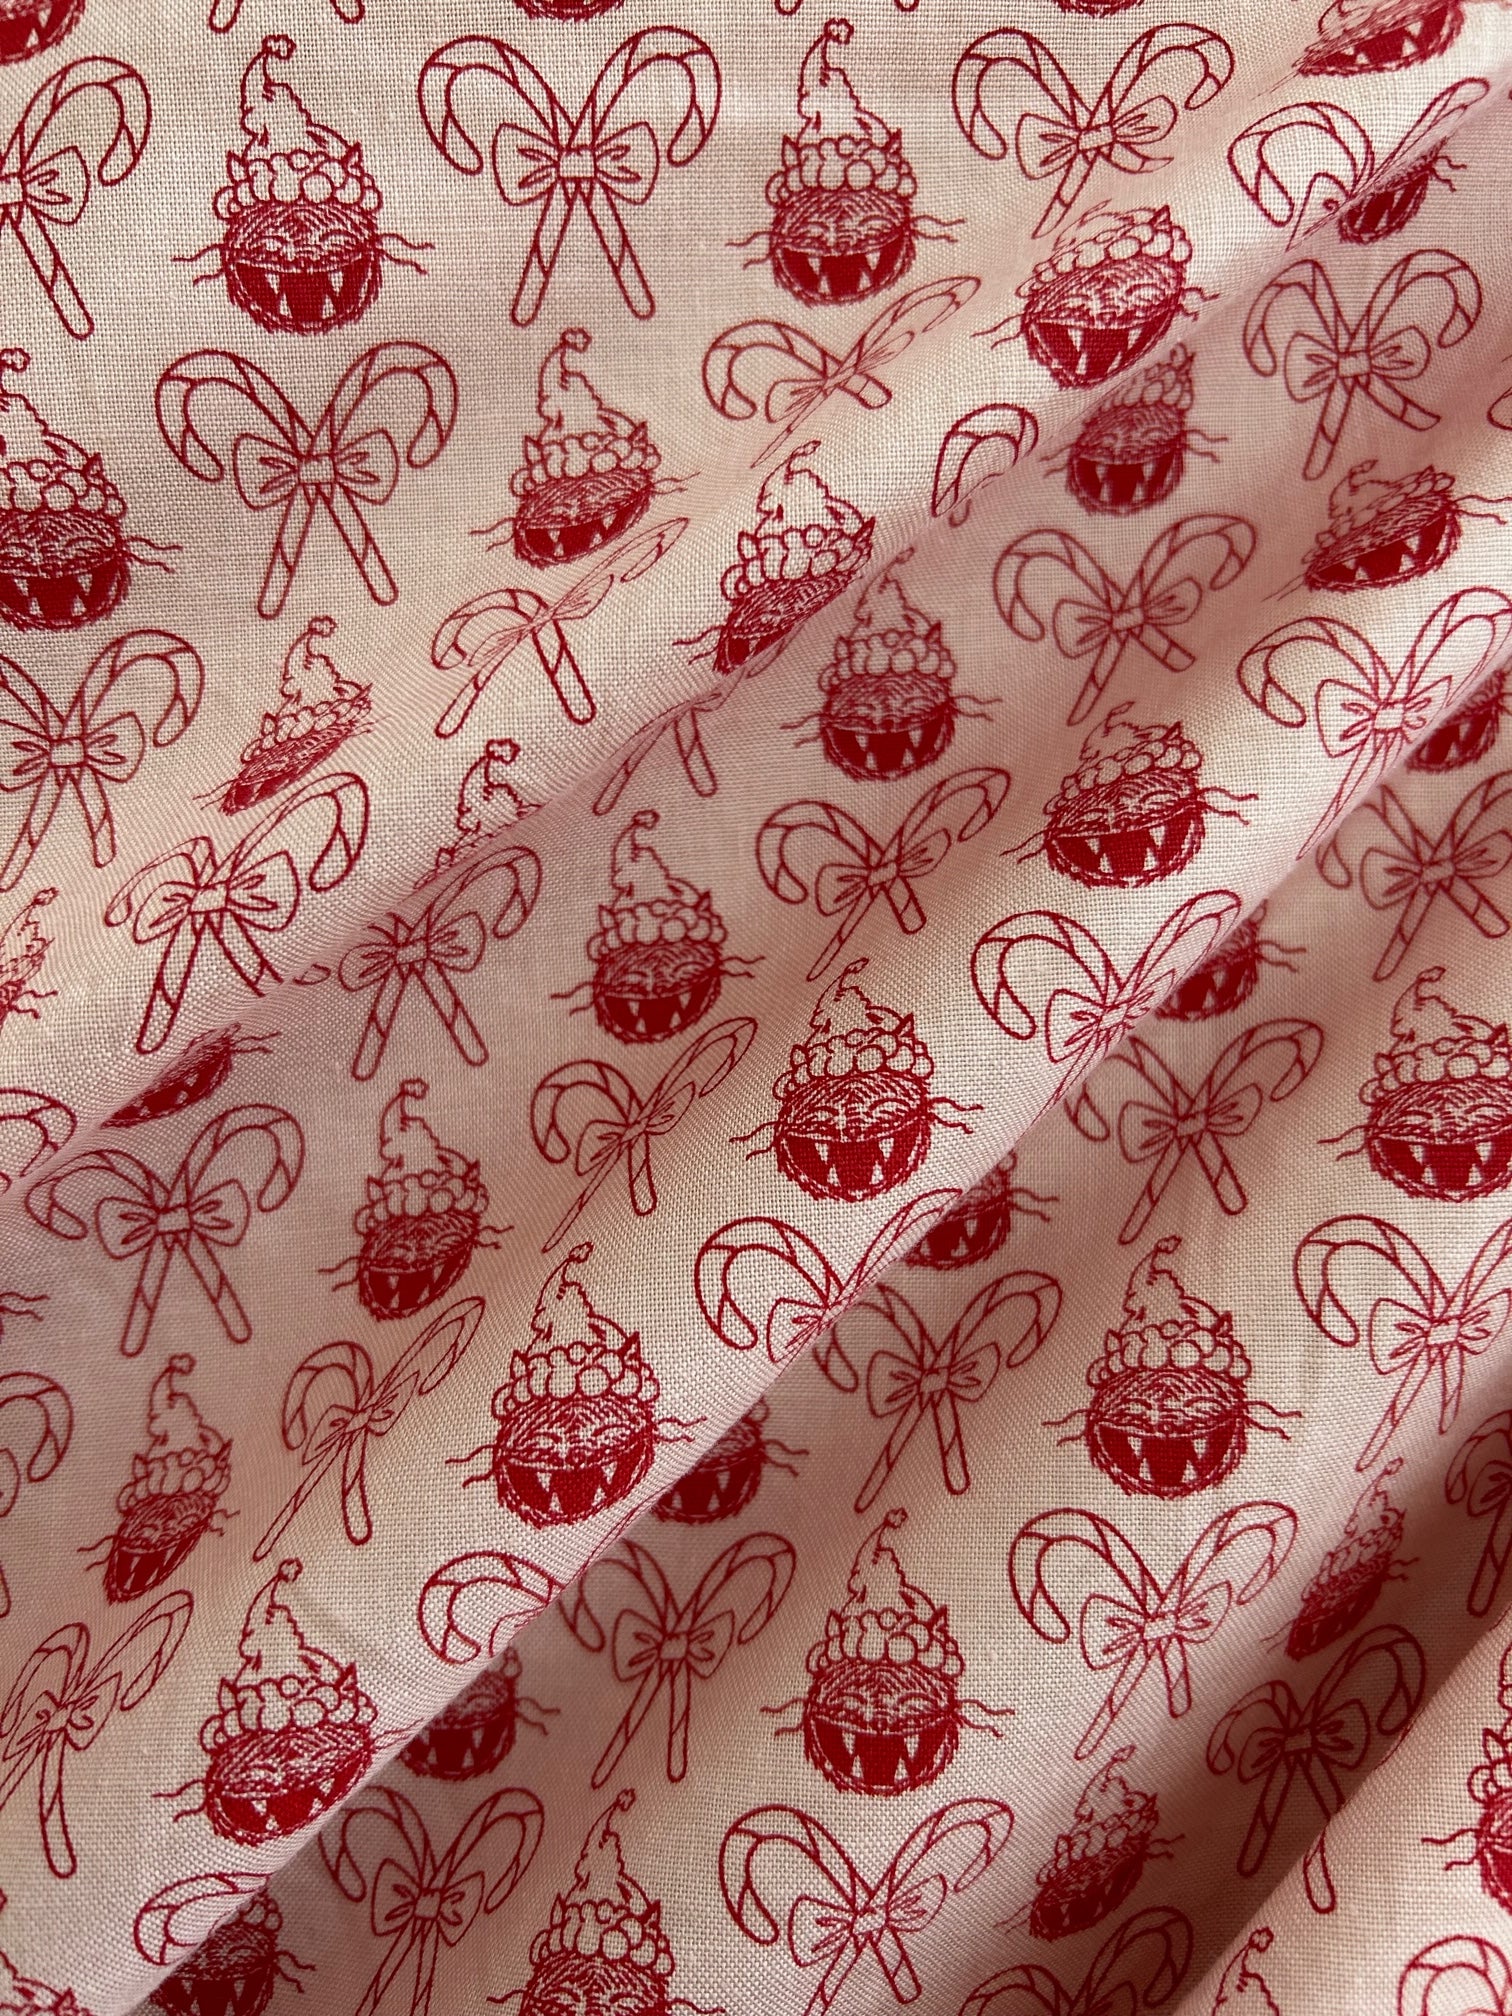 close up of the fabric patterns showing repeating print of cats in holiday hats and candy canes